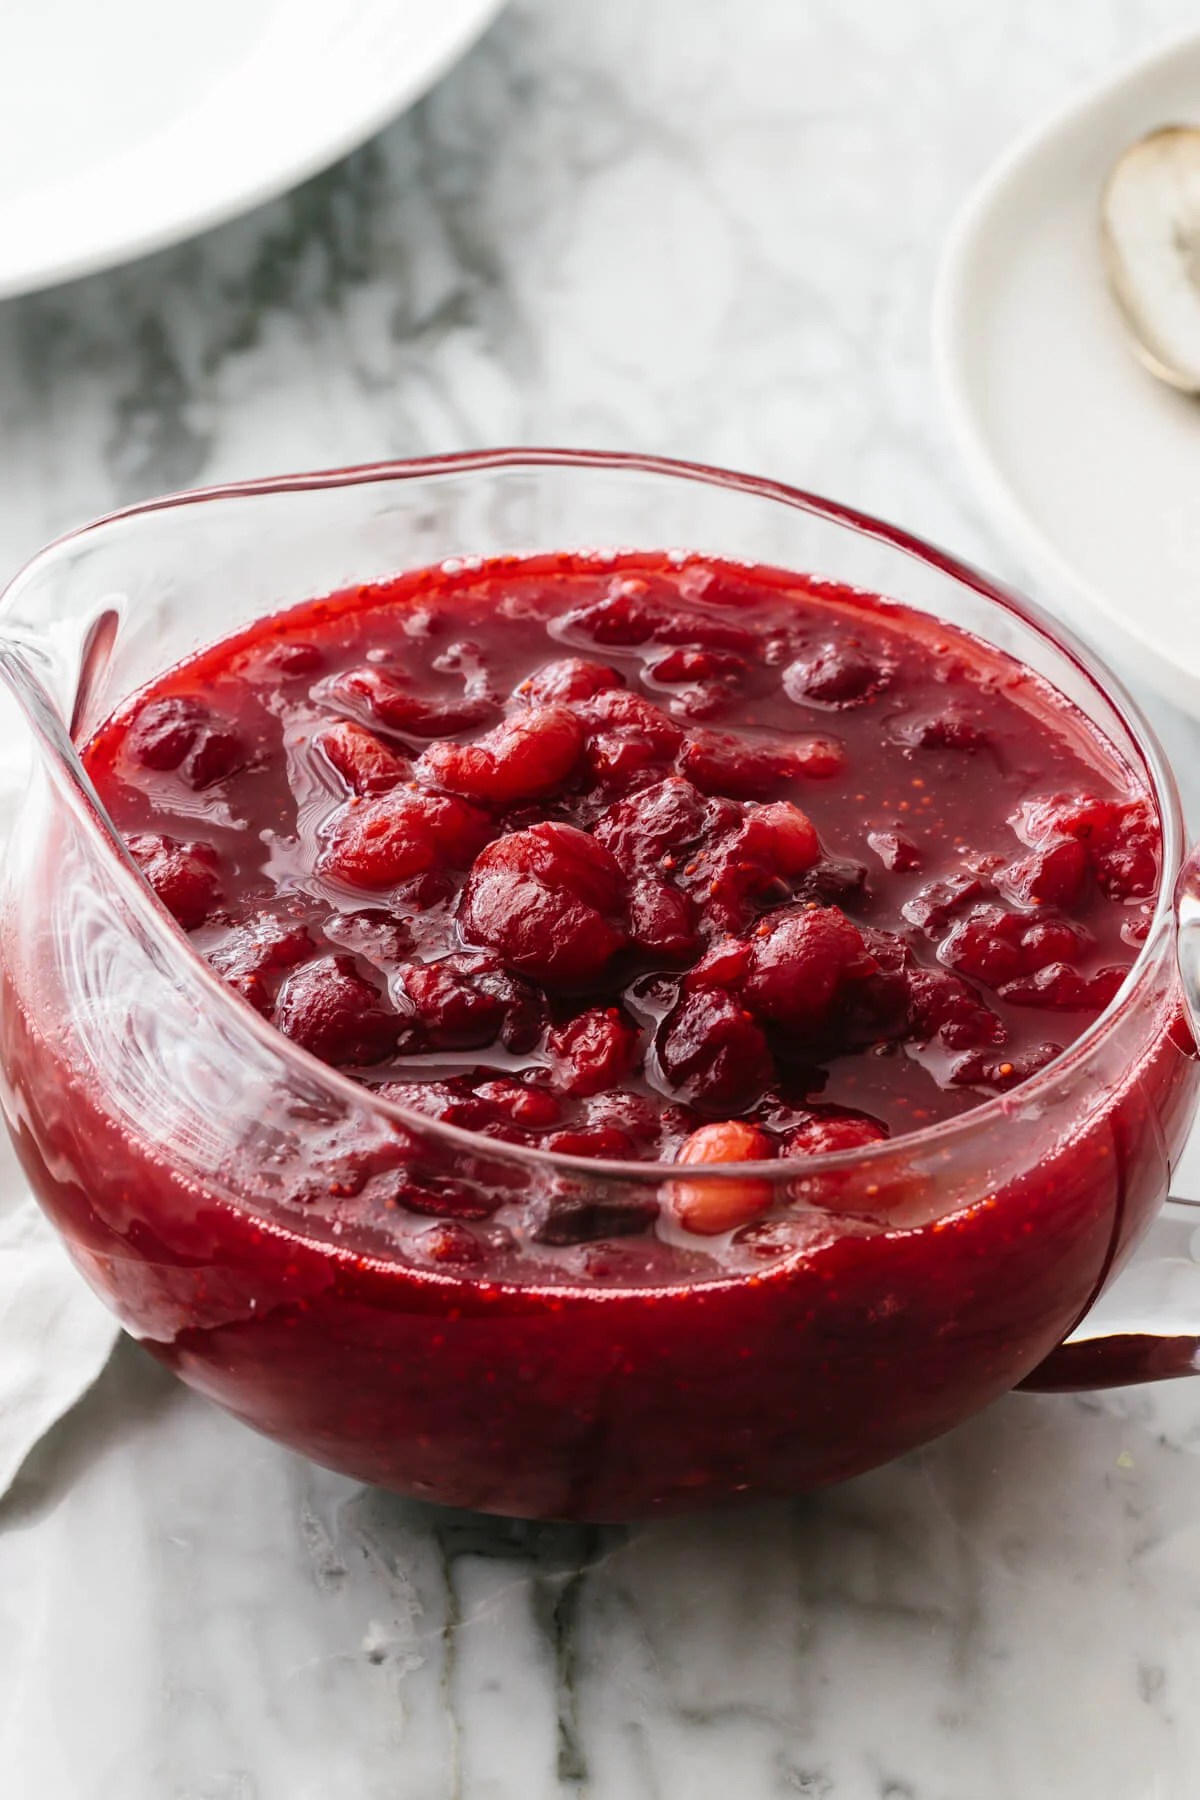 Homemade cranberry sauce in a glass bowl.